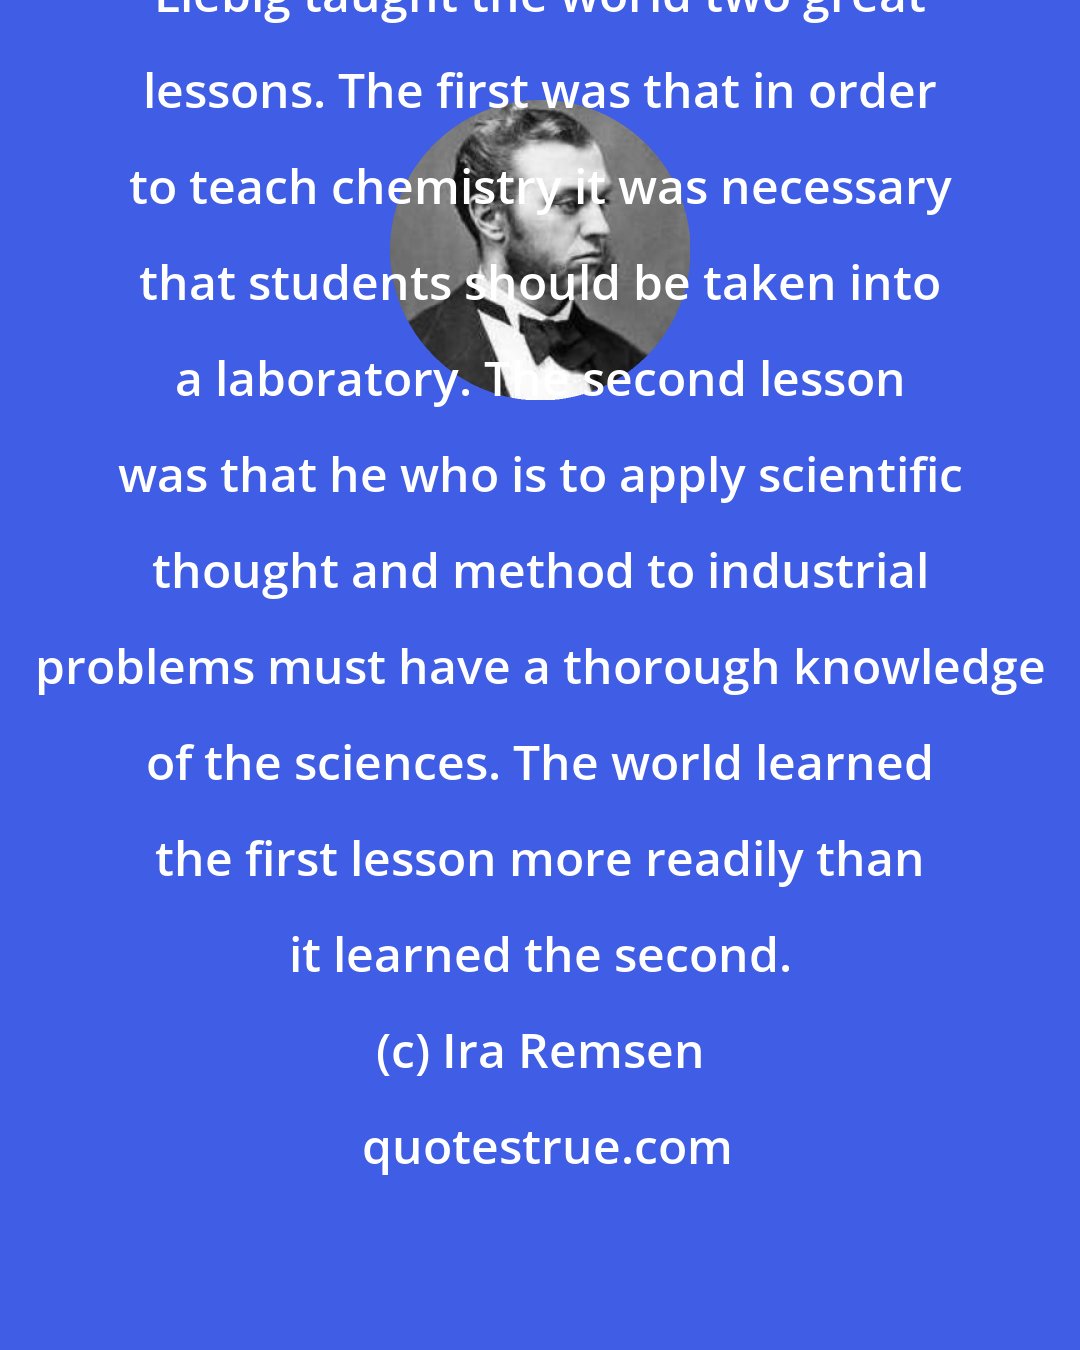 Ira Remsen: Liebig taught the world two great lessons. The first was that in order to teach chemistry it was necessary that students should be taken into a laboratory. The second lesson was that he who is to apply scientific thought and method to industrial problems must have a thorough knowledge of the sciences. The world learned the first lesson more readily than it learned the second.